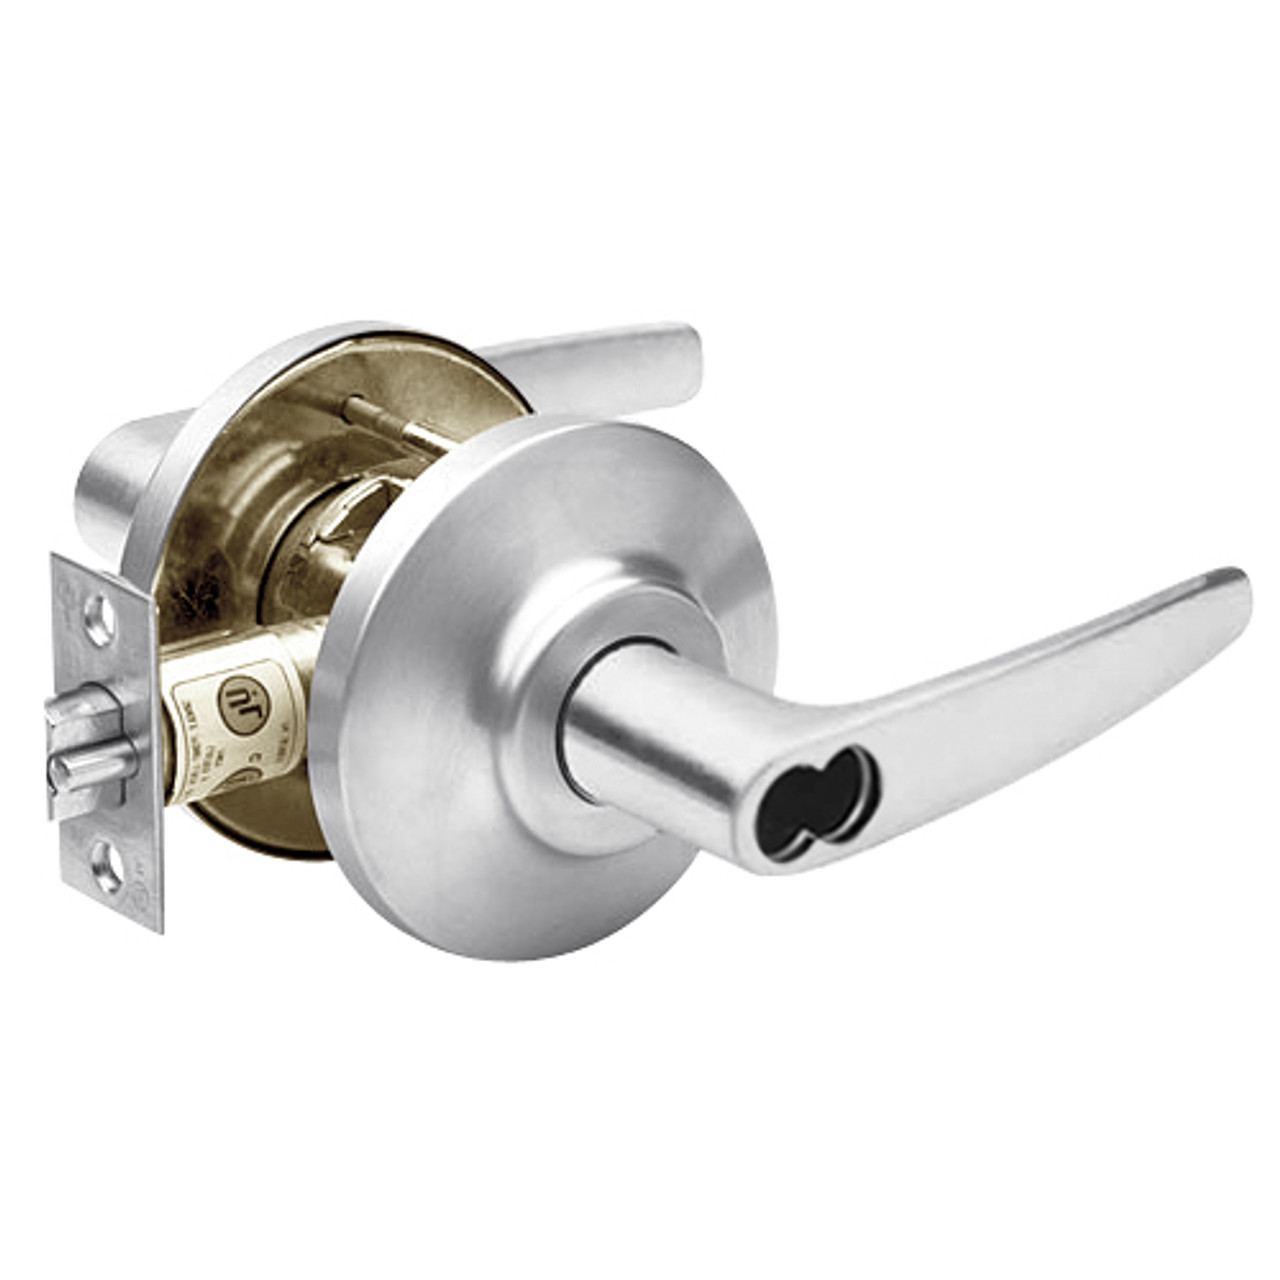 7KC47AB16DSTK625 Best 7KC Series Entrance Medium Duty Cylindrical Lever Locks with Curved Without Return Lever Design in Bright Chrome